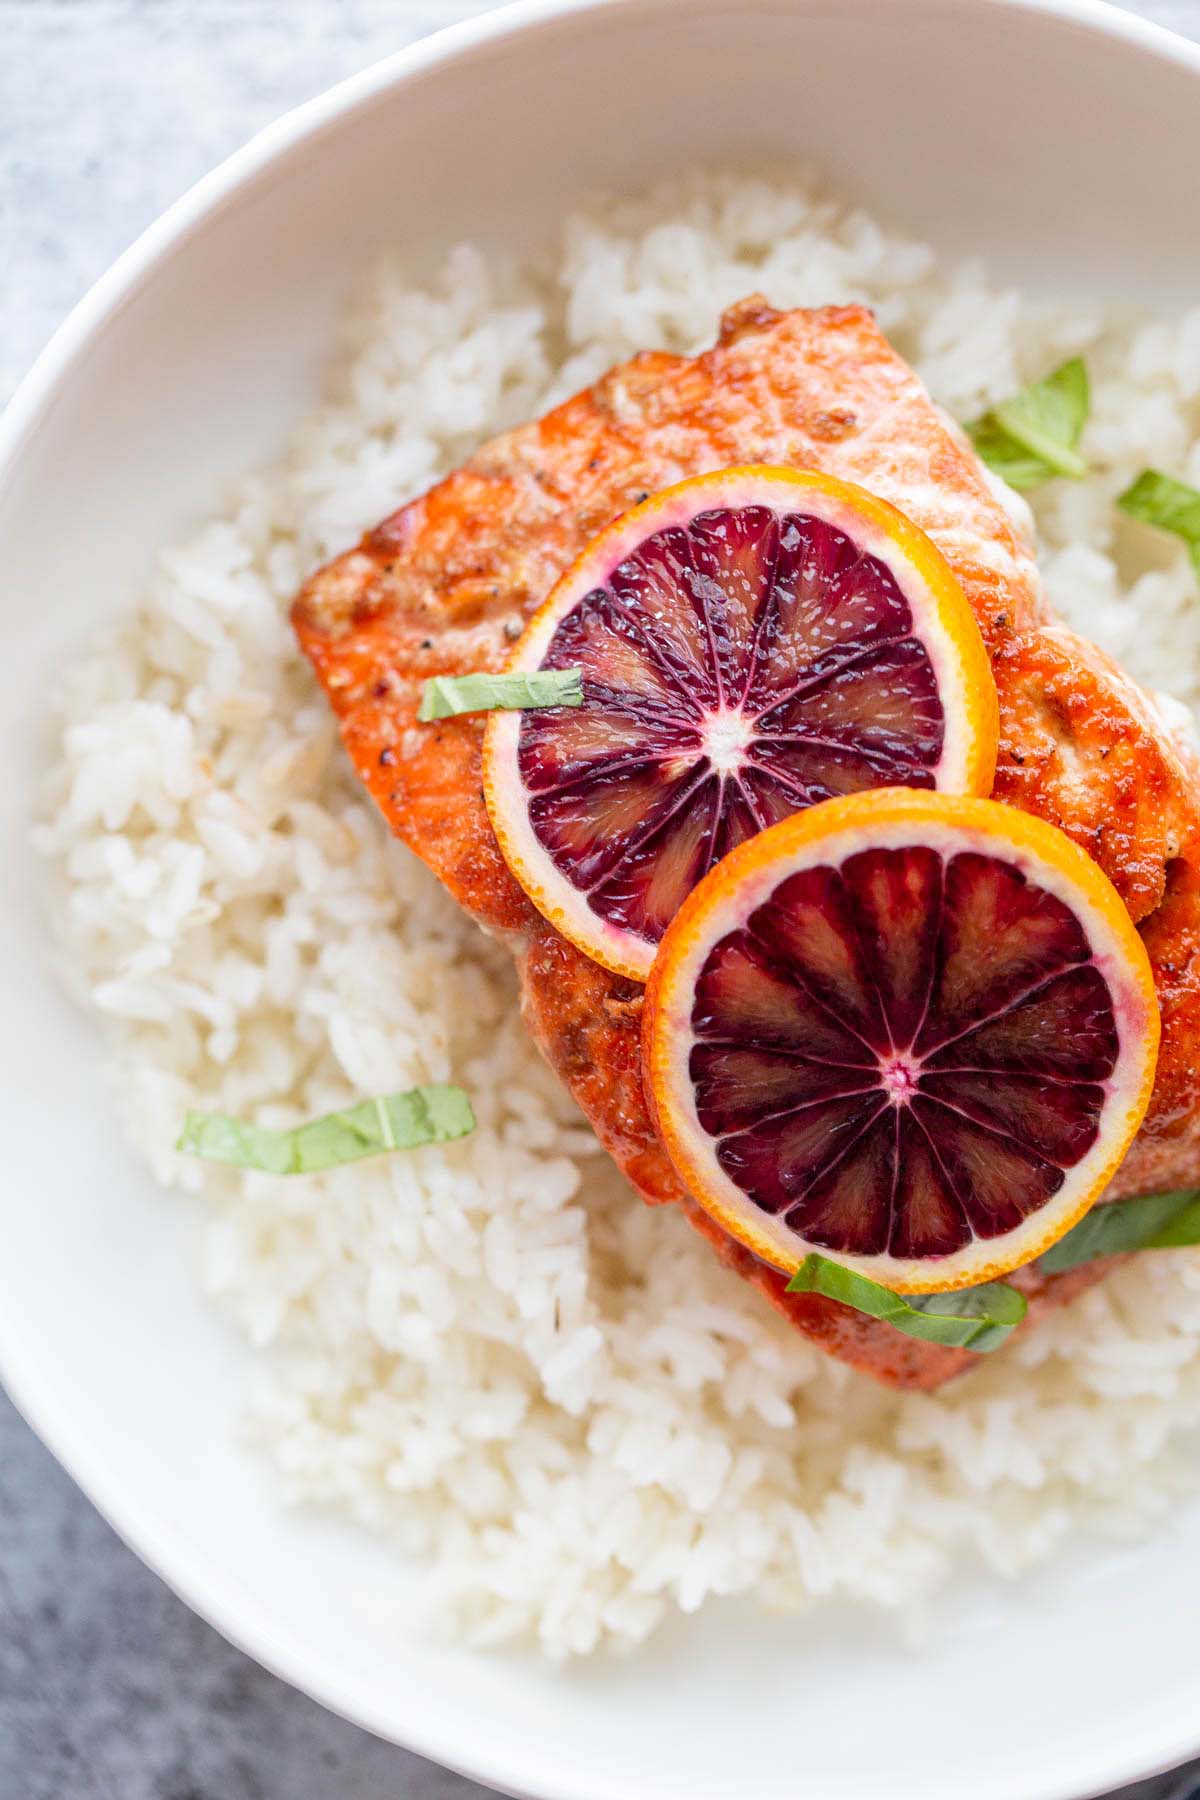 Salmon with rice and blood orange slices.